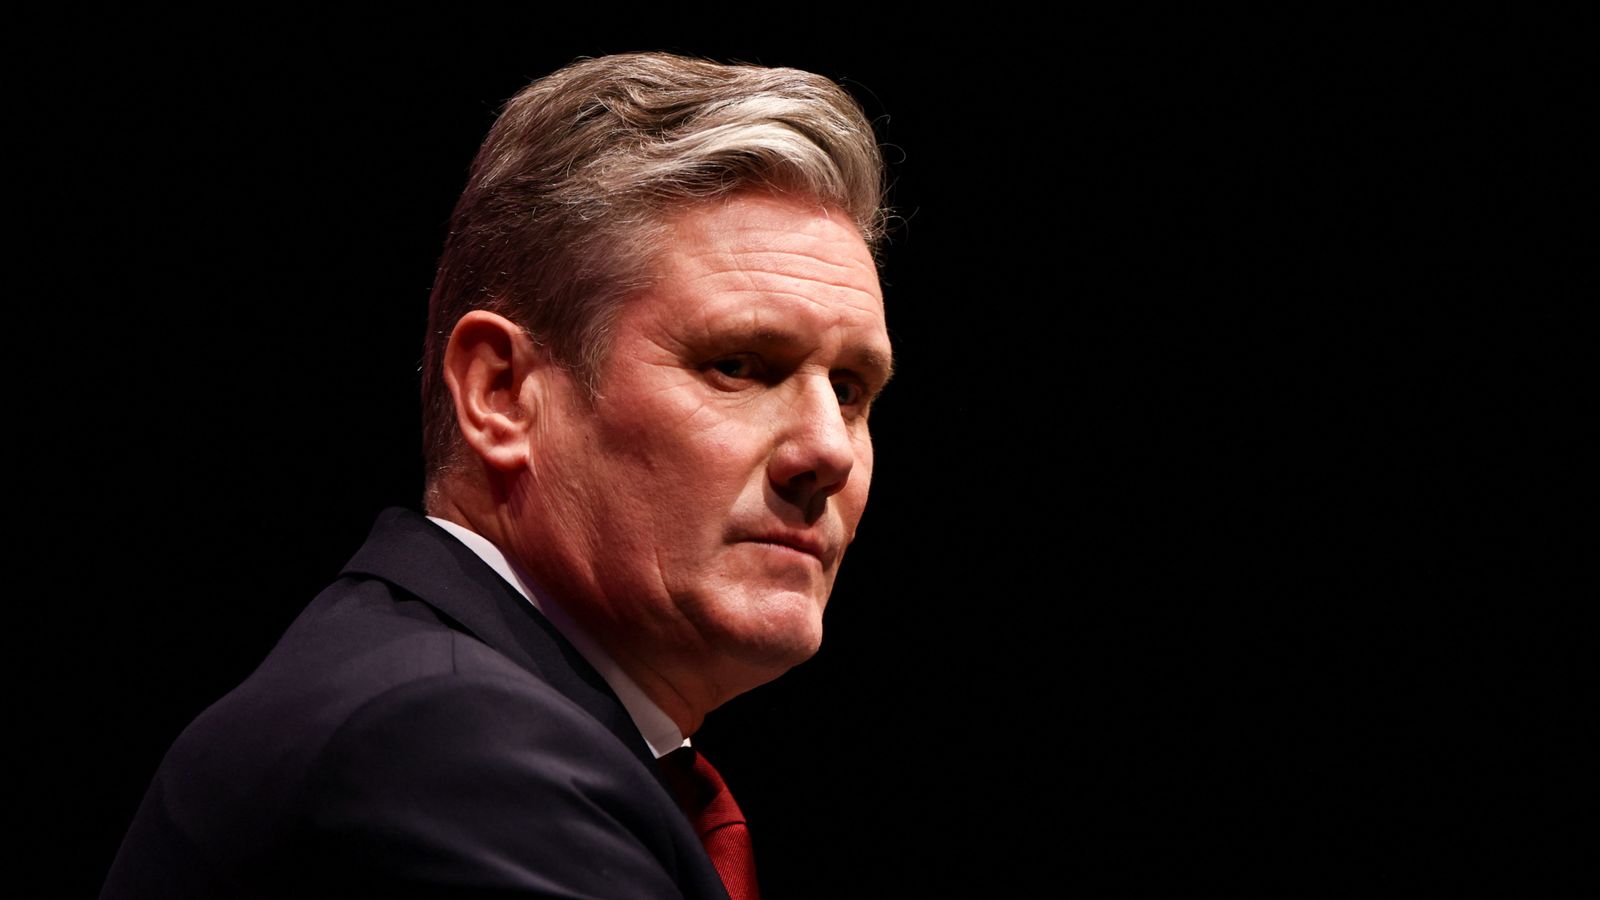 Britain's economic trajectory will soon see it overtaken by Poland, Starmer to warn